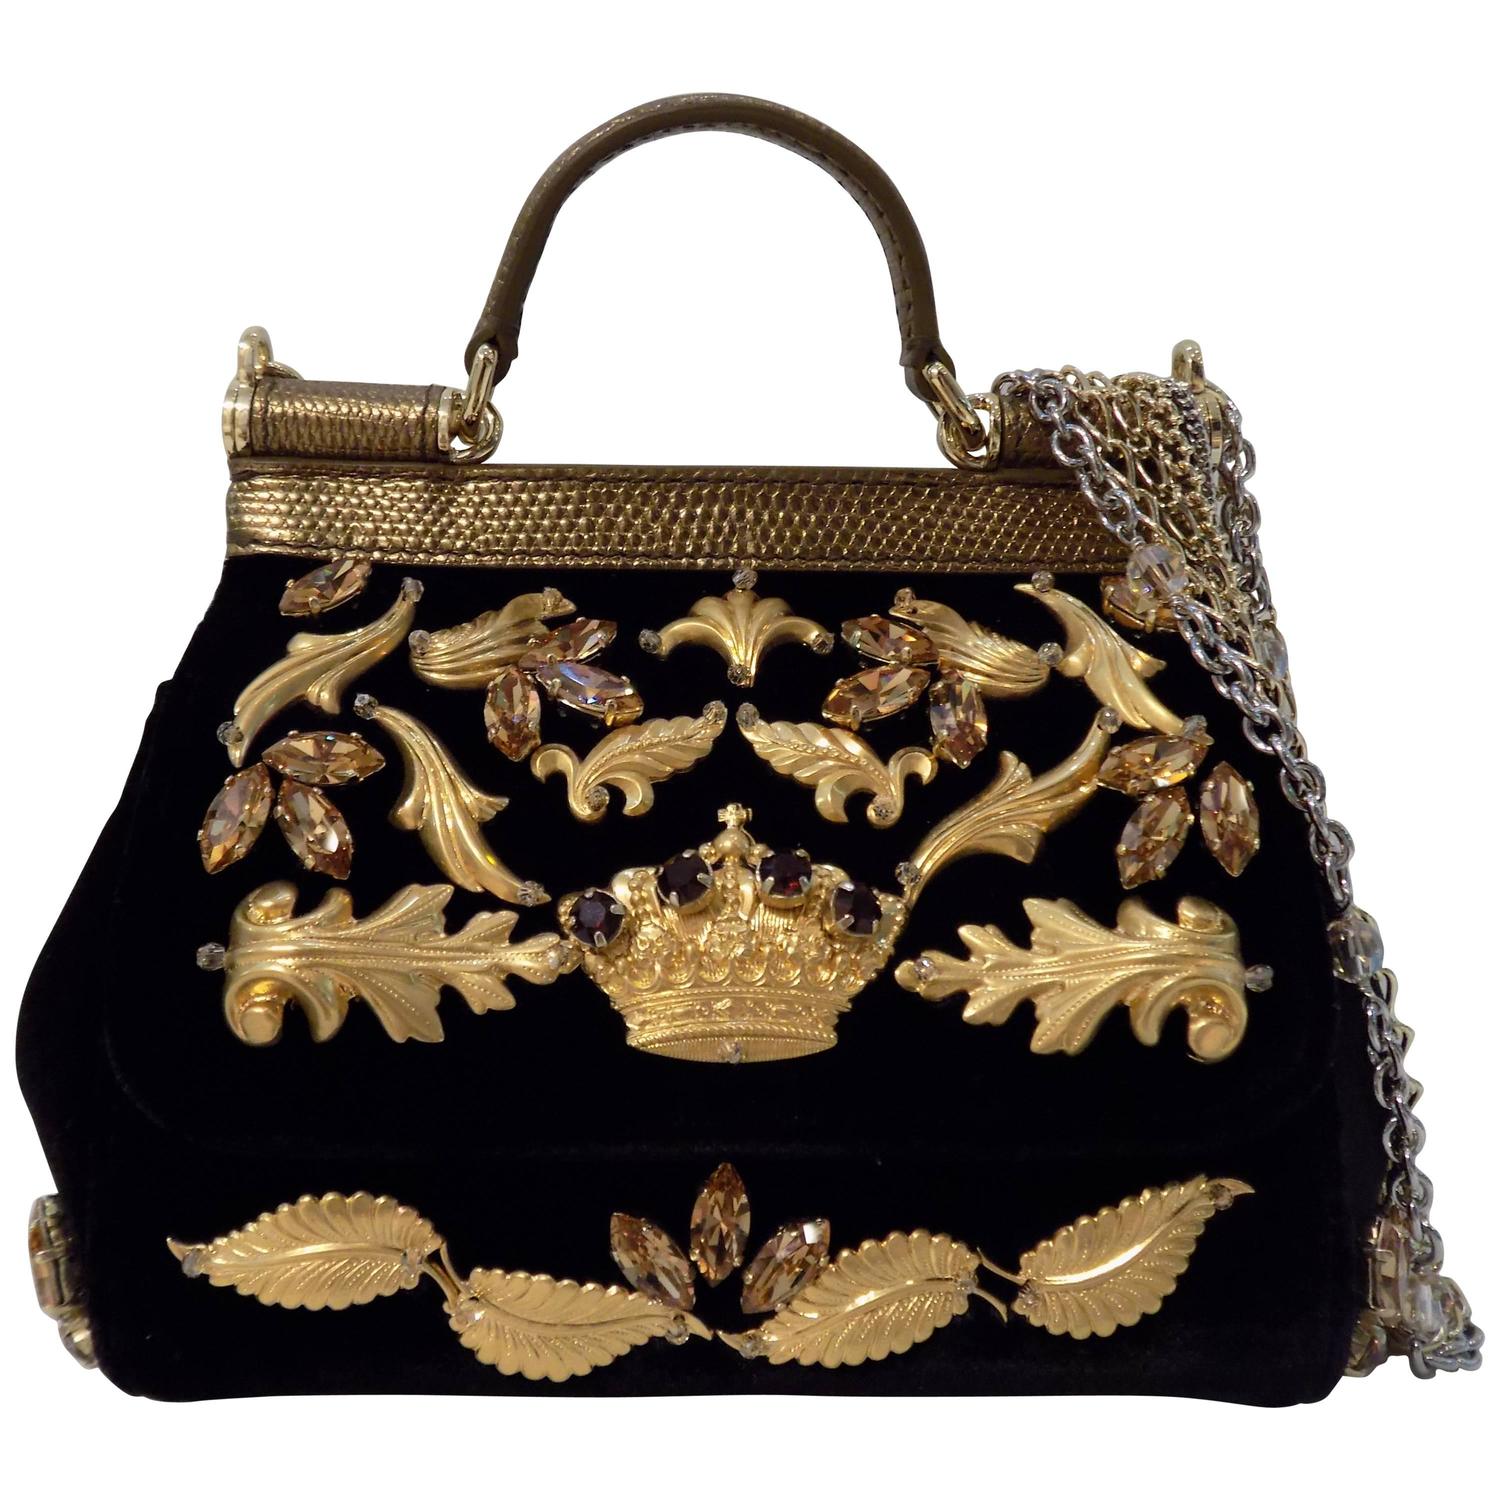 Dolce and Gabbana Limited Edition Bag For Sale at 1stdibs